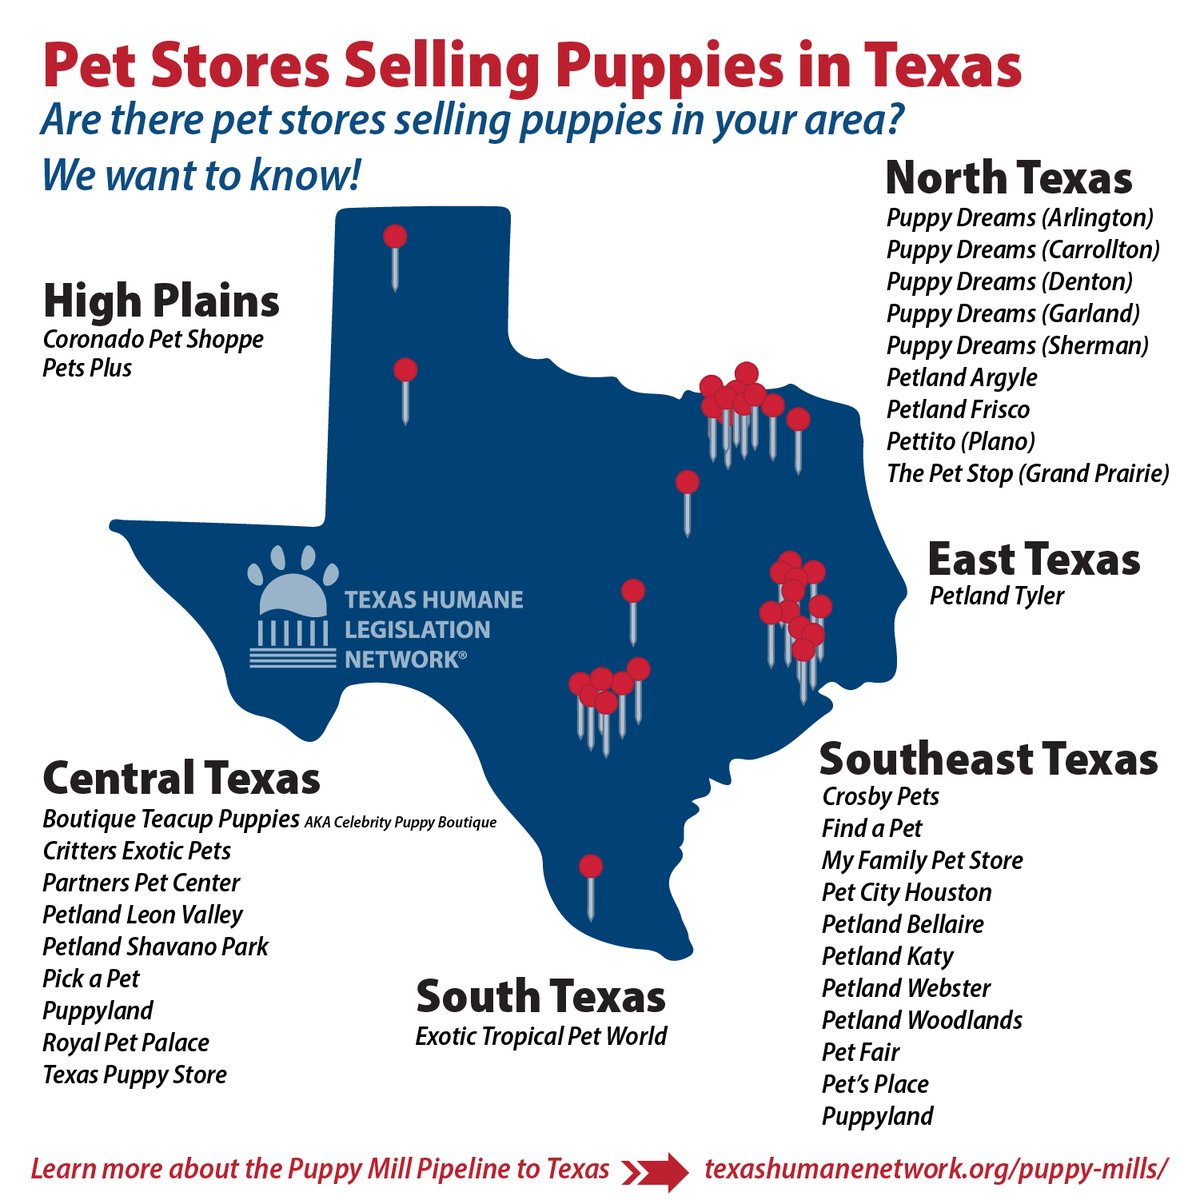 Have you seen new pet stores open in your area? We want to know about it! In recent months, 3 NEW puppy selling stores have popped up in North Texas alone.

The purebred dog you are looking for is waiting for you to adopt at your local shelter.

#puppymills #lovepuppies #petland